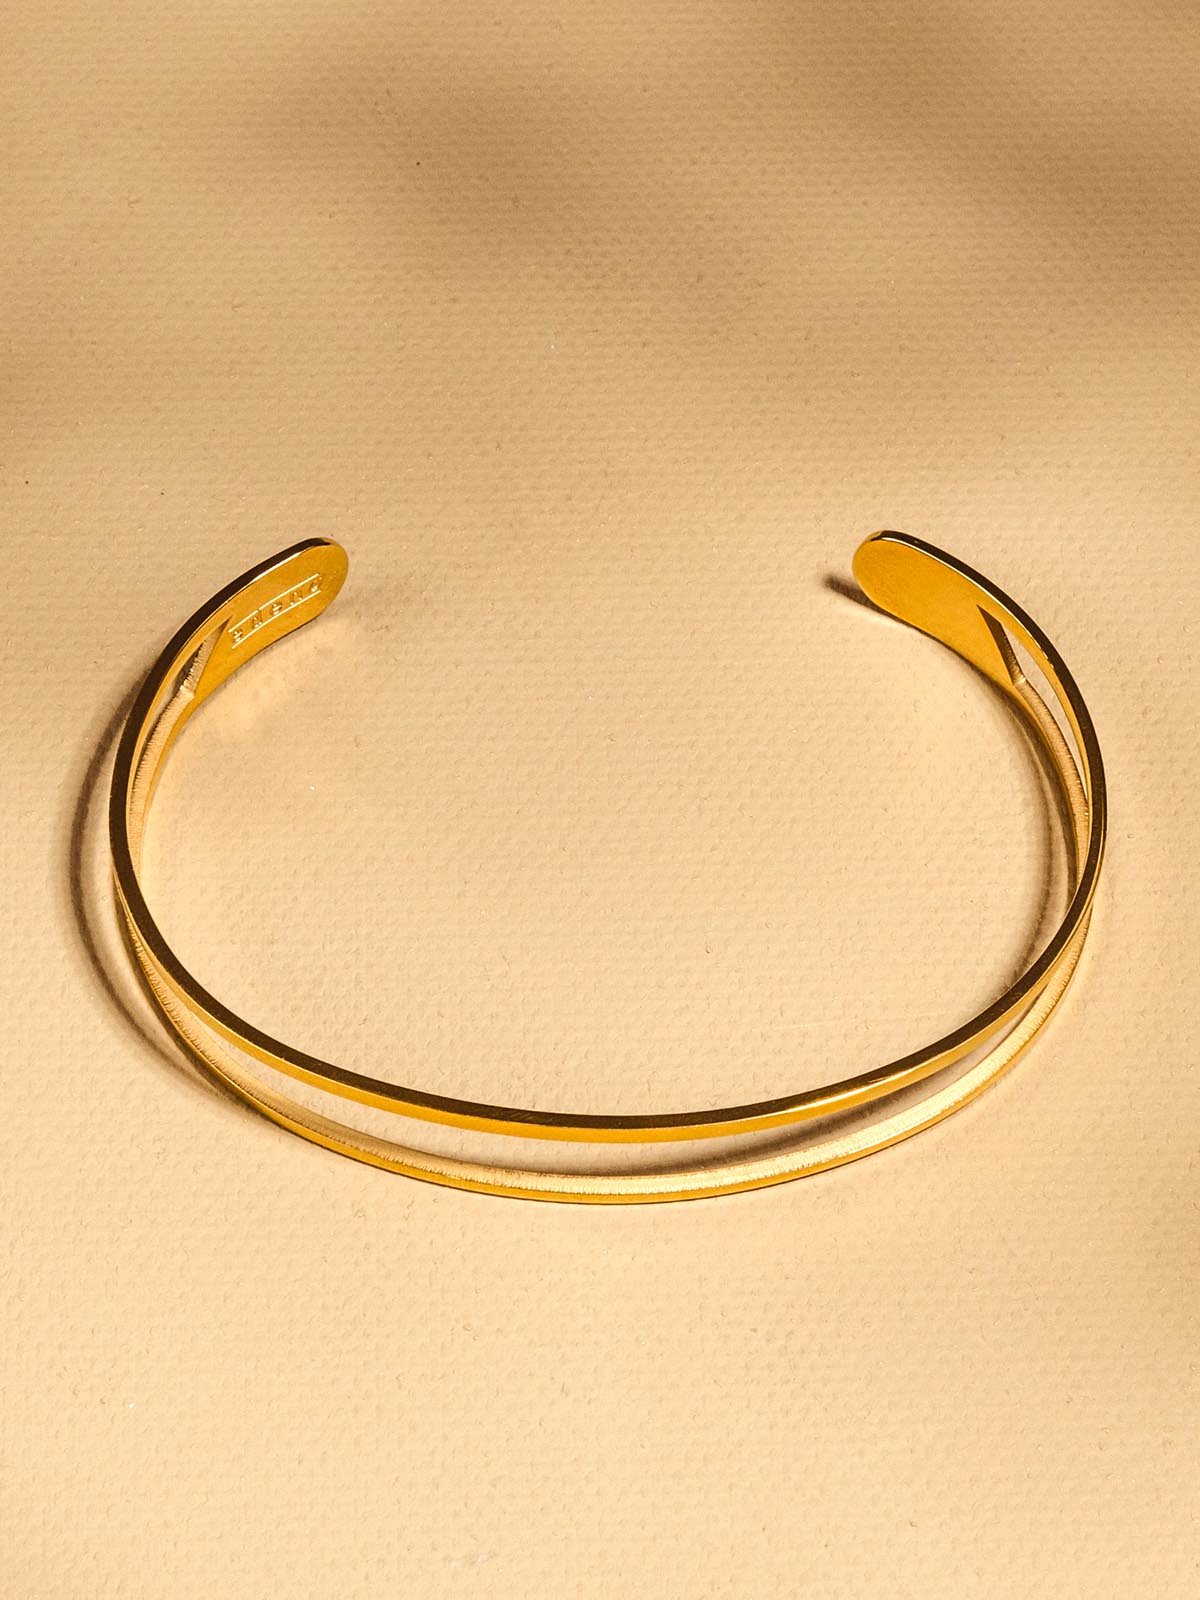 Golden cuff with split metal through the center of the braclet on tan background